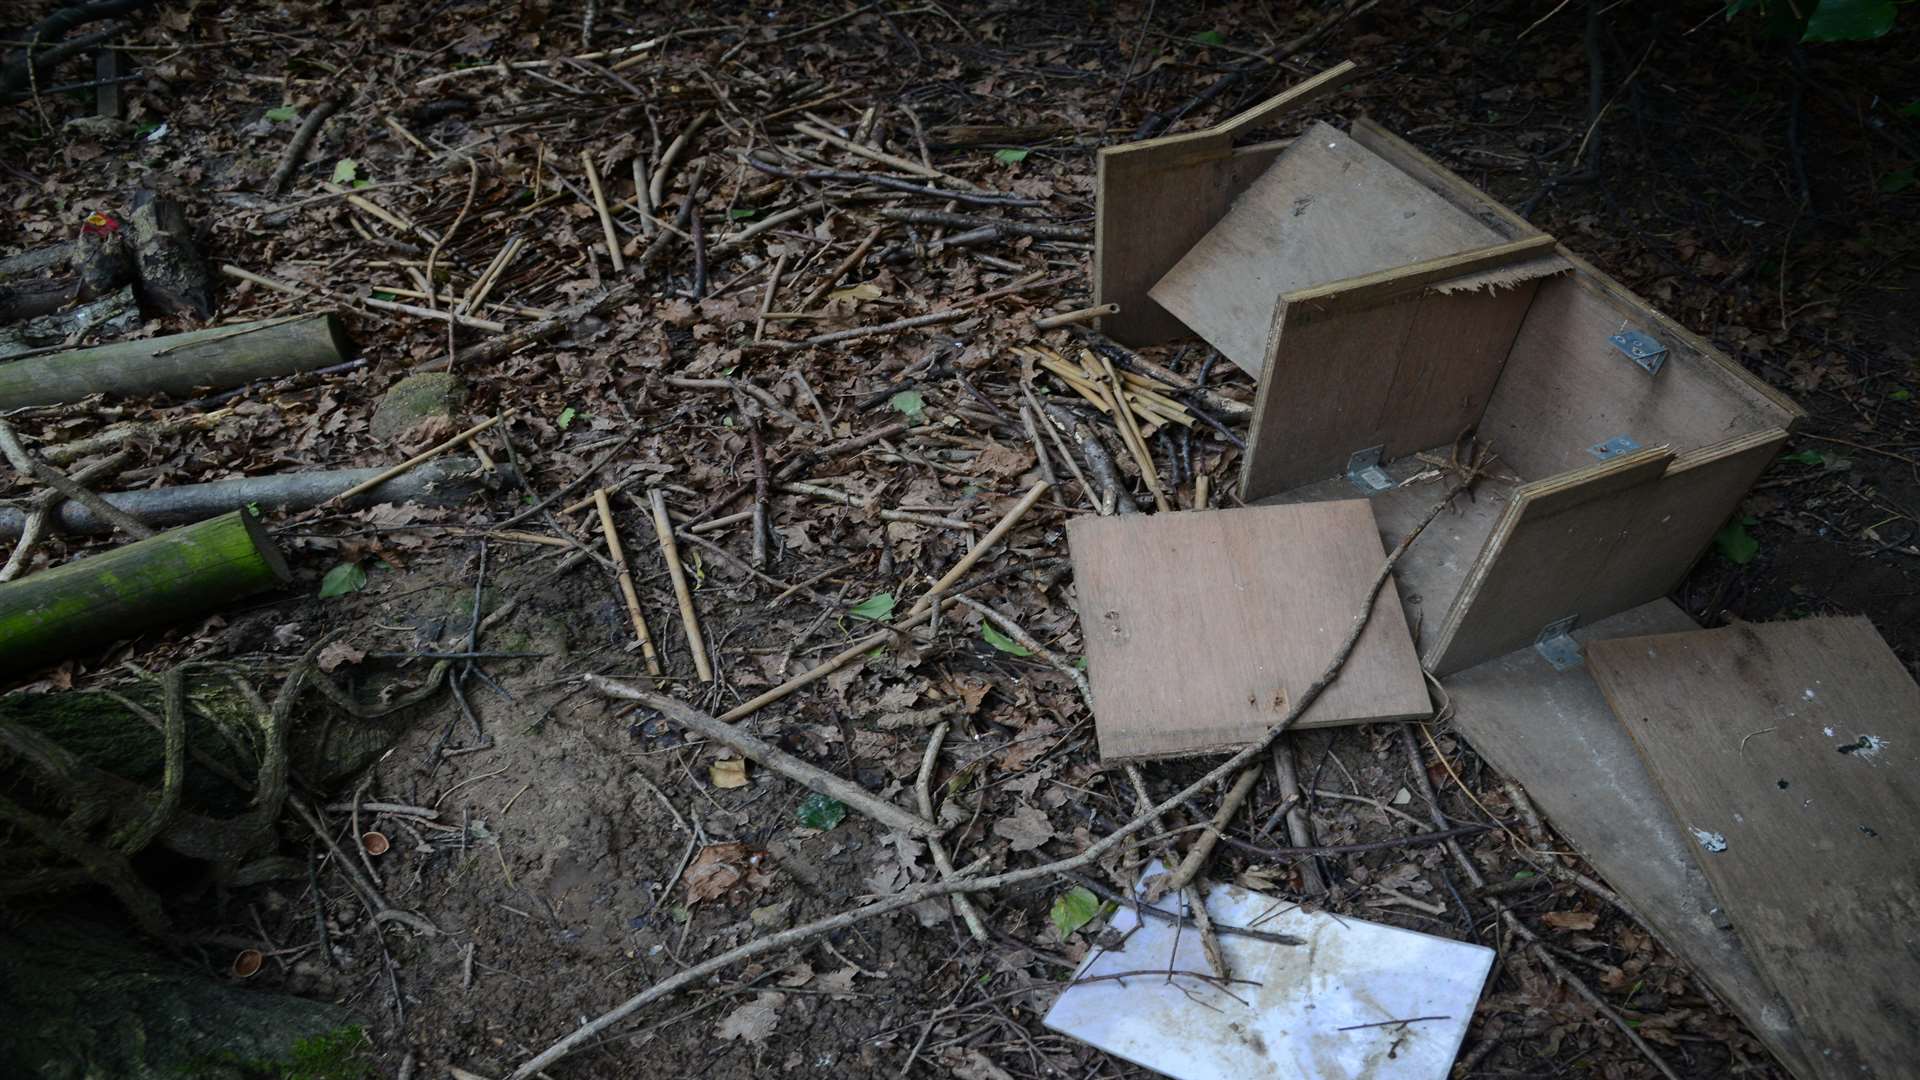 Bird boxes were among the items destroyed by vandals